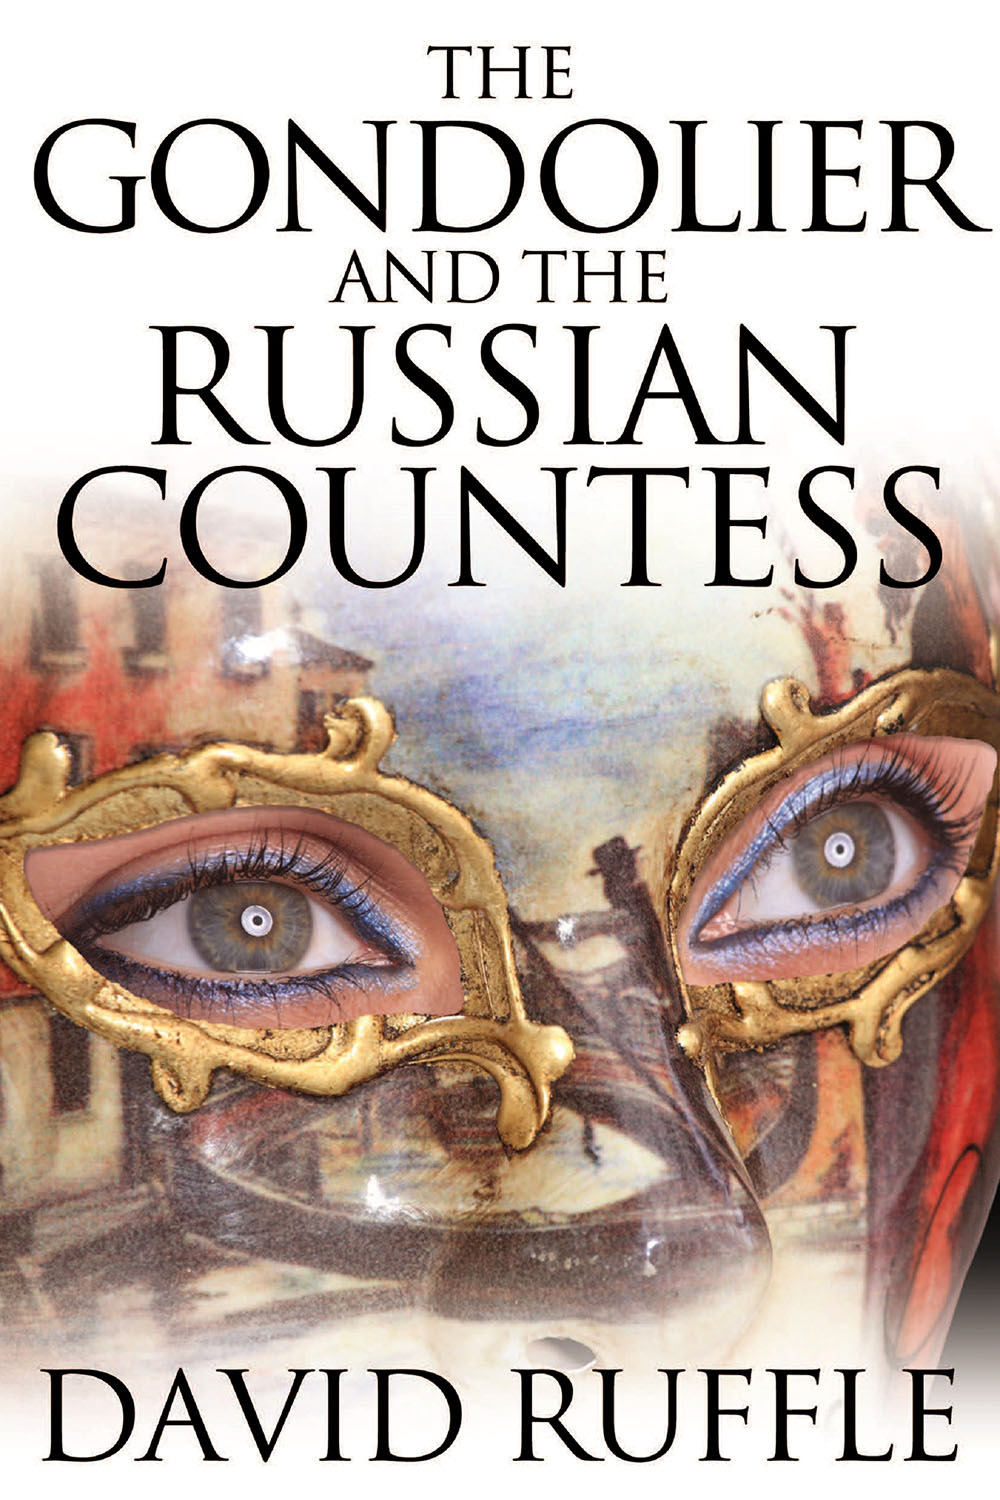 Ruffle, David - The Gondolier and The Russian Countess, ebook